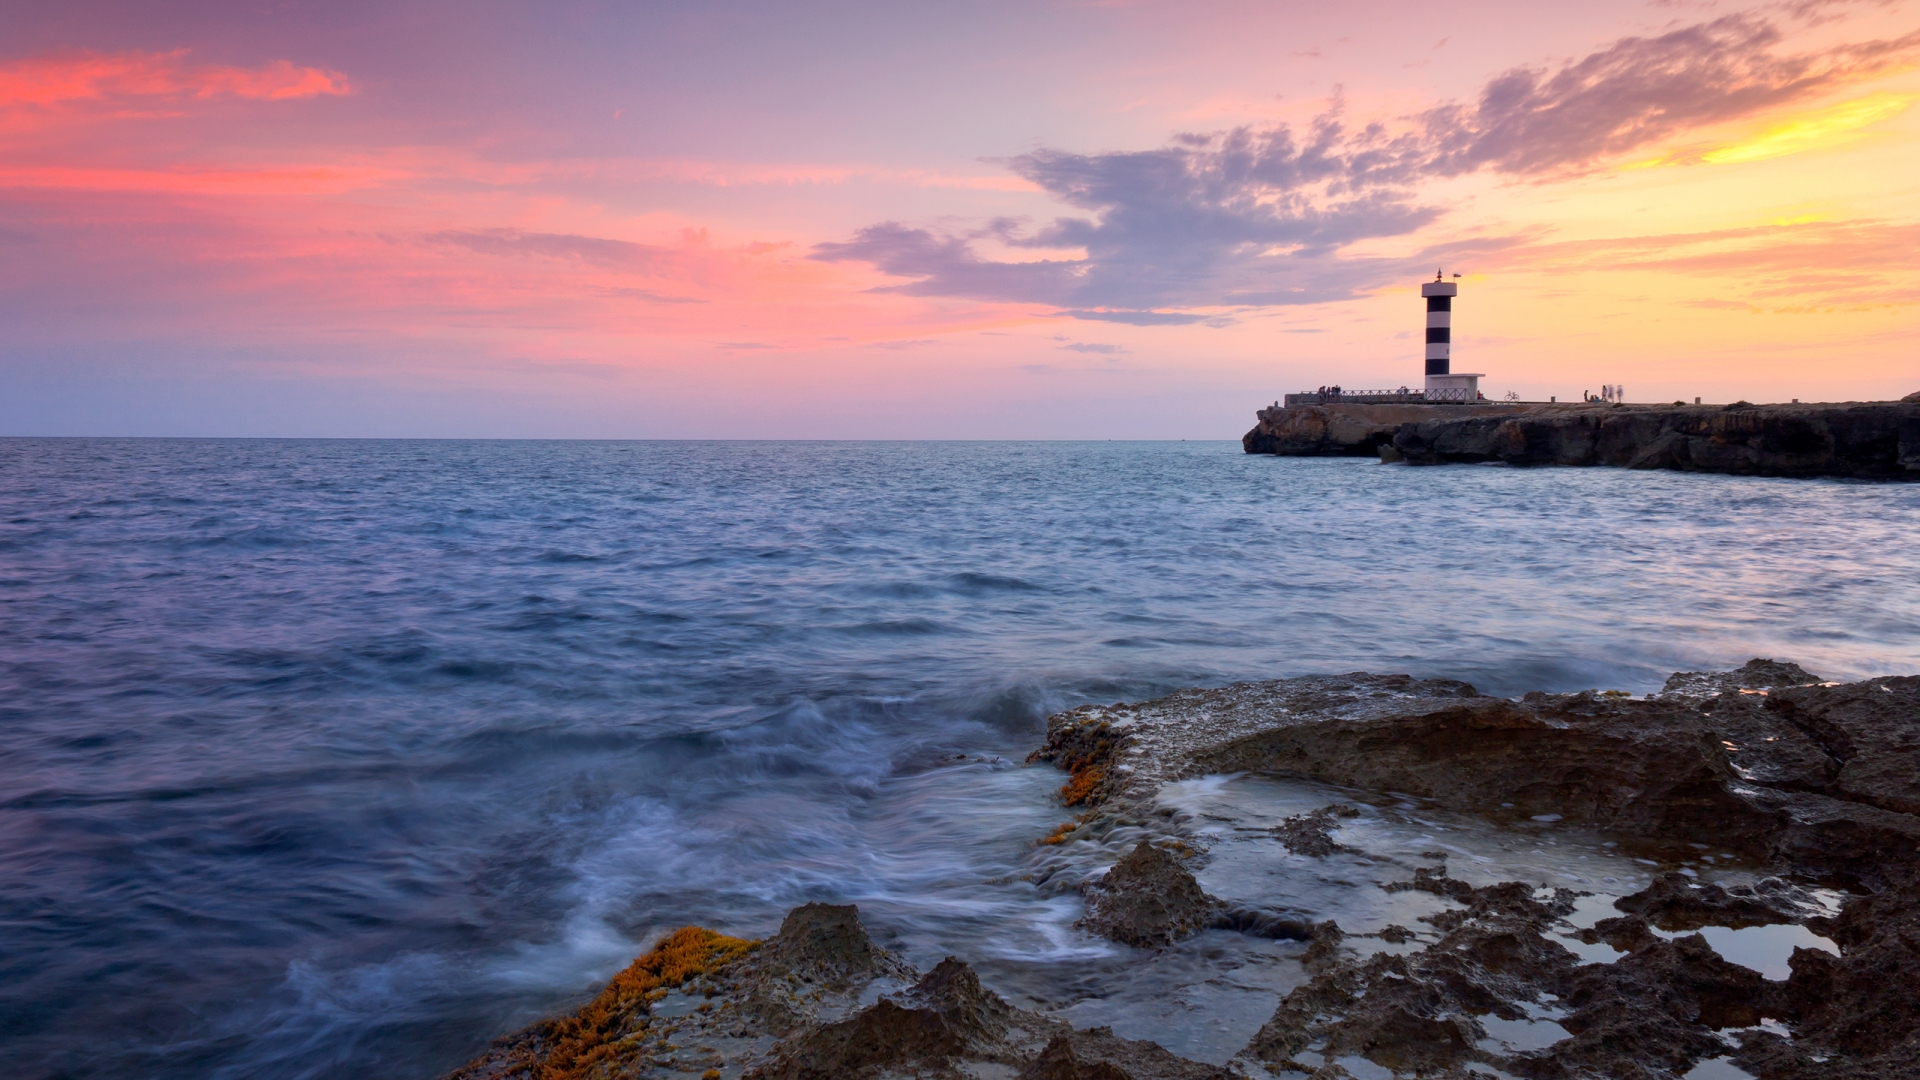 Beautiful Lighthouses at Sunset HD Wallpaper, Background Image